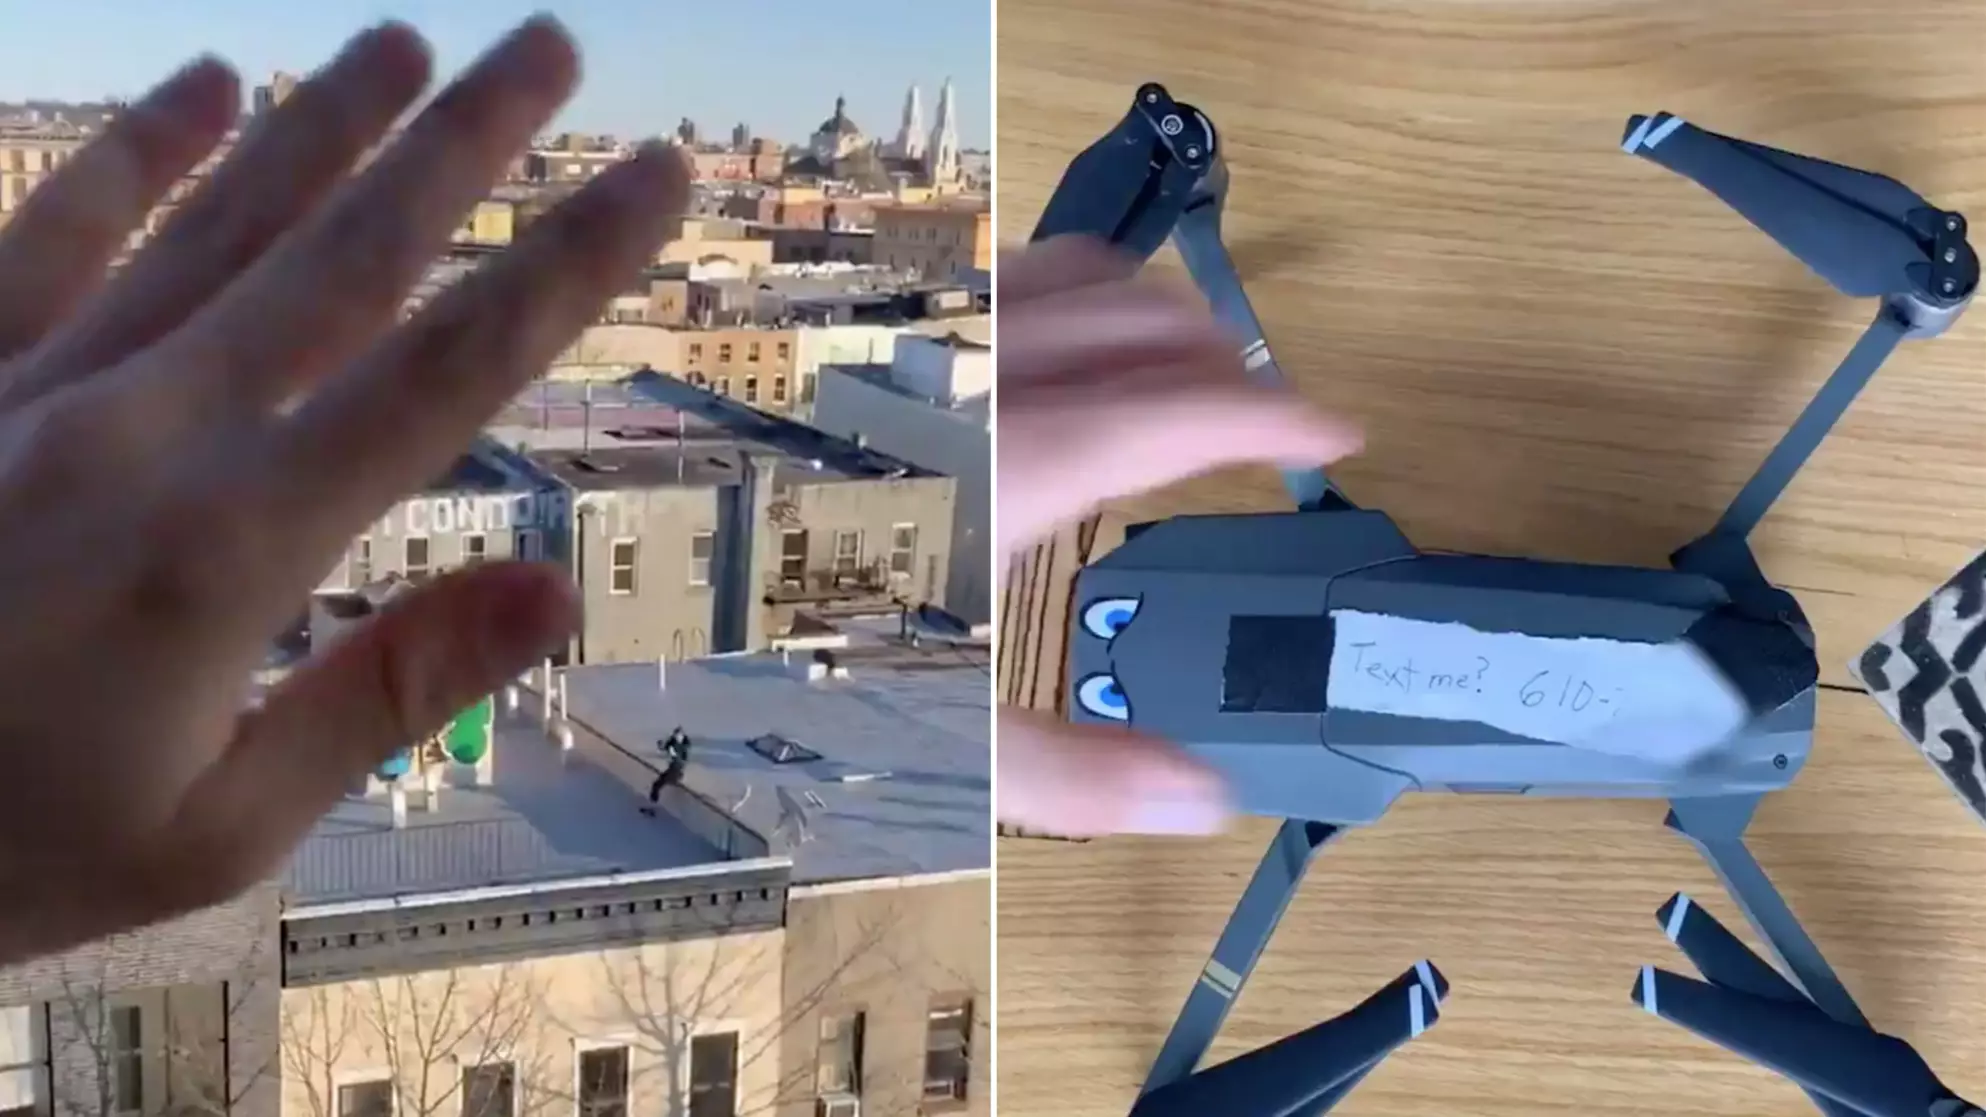 Man Uses Drone To Fly His Phone Number Over To Woman During New York Lockdown 